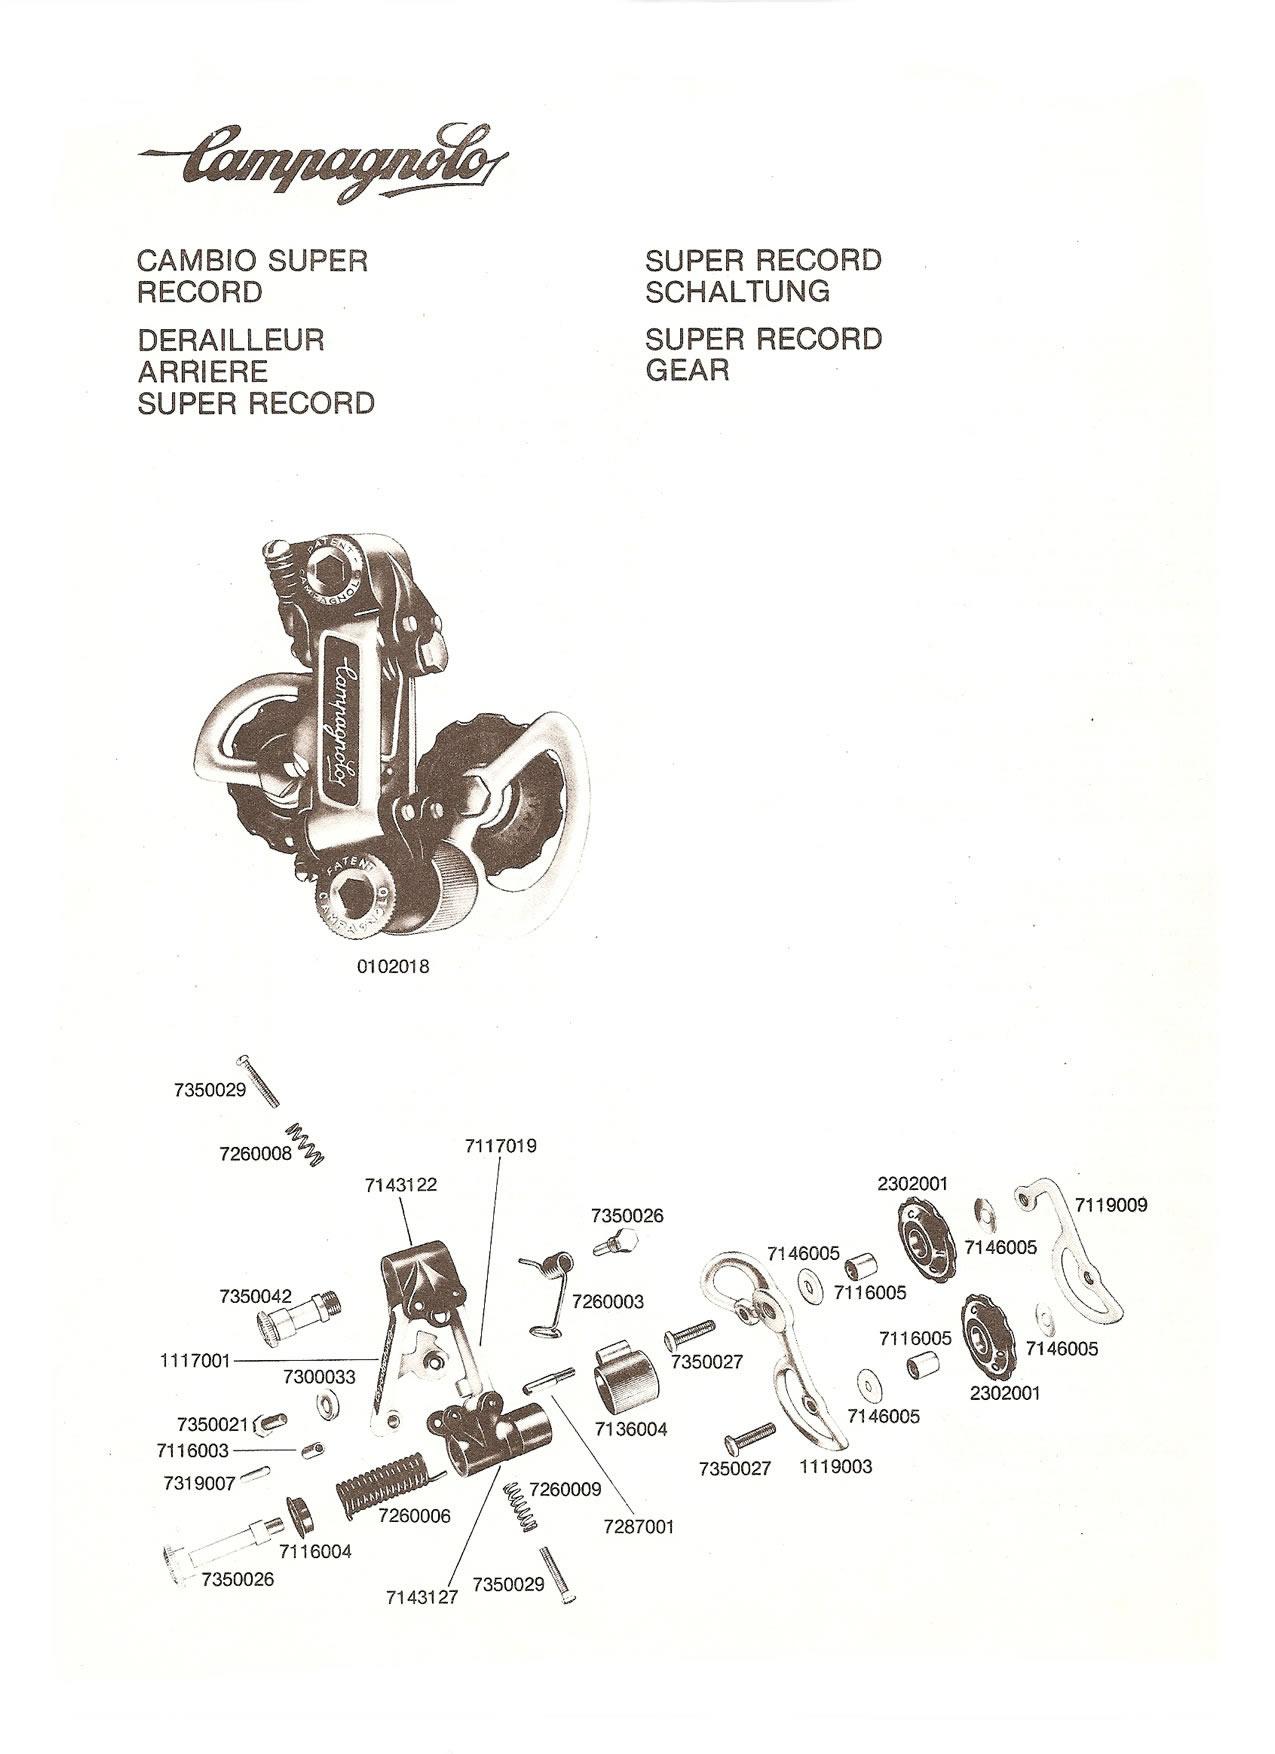 1973 Campagnolo Catalog 17 Supplement